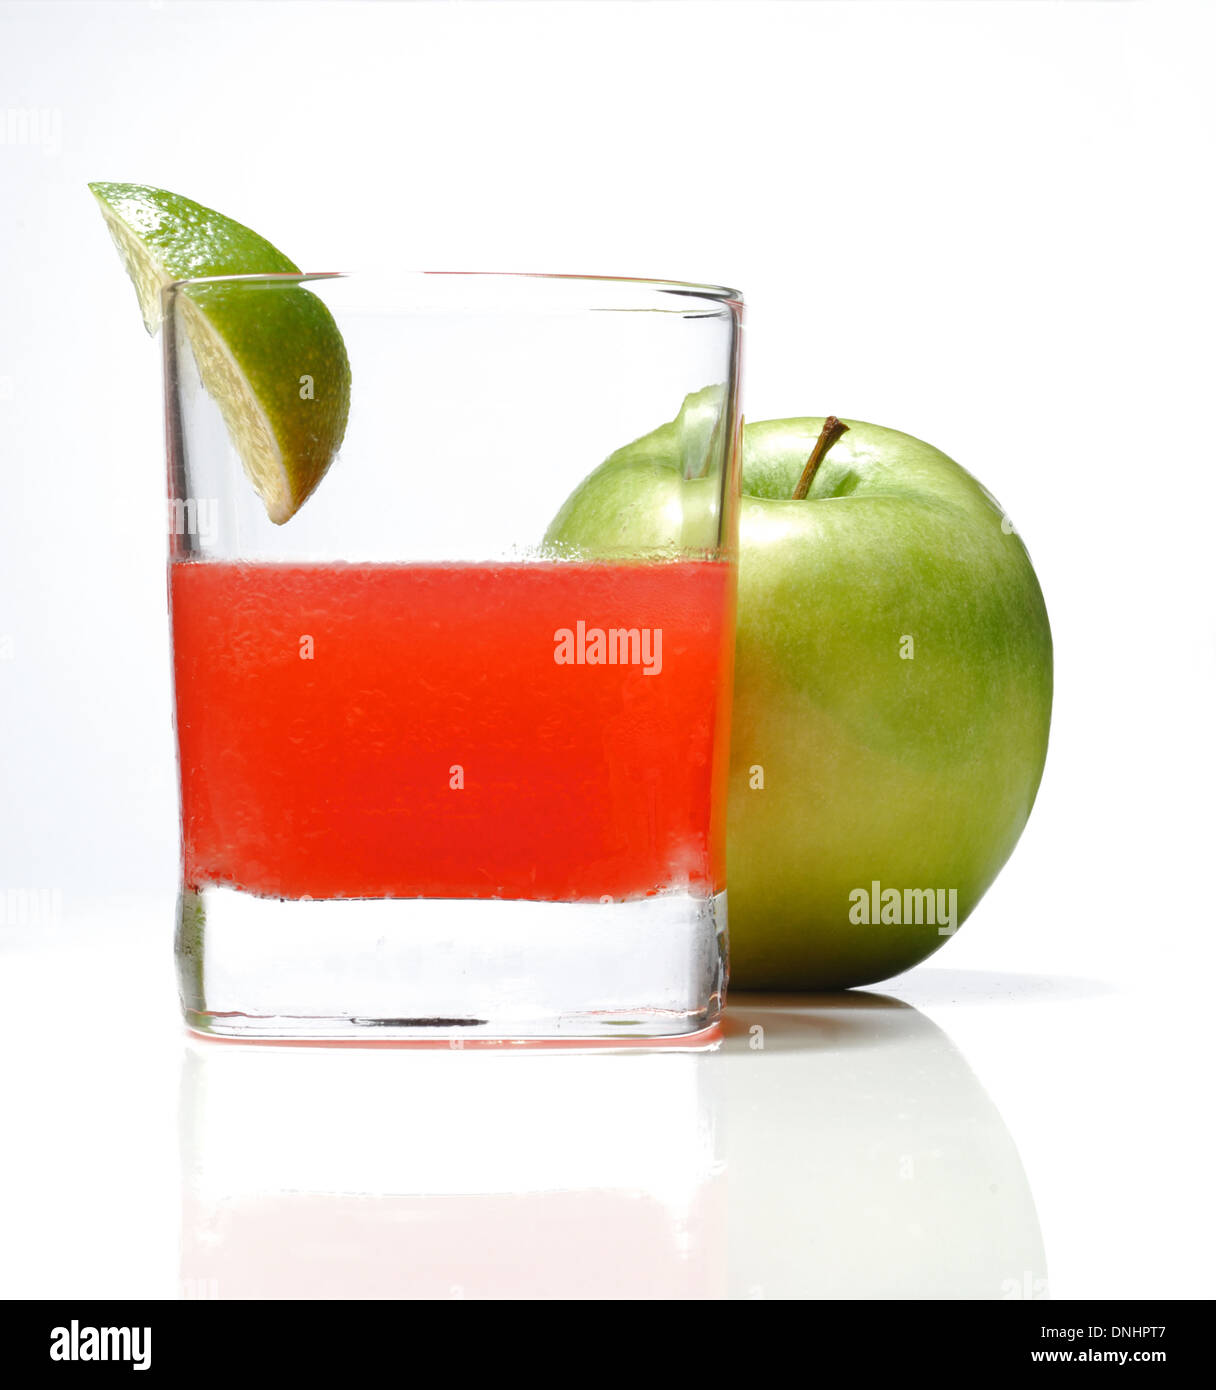 A colorful cocktail drink in a glass with a wedge of lime and a whole green apple. Stock Photo